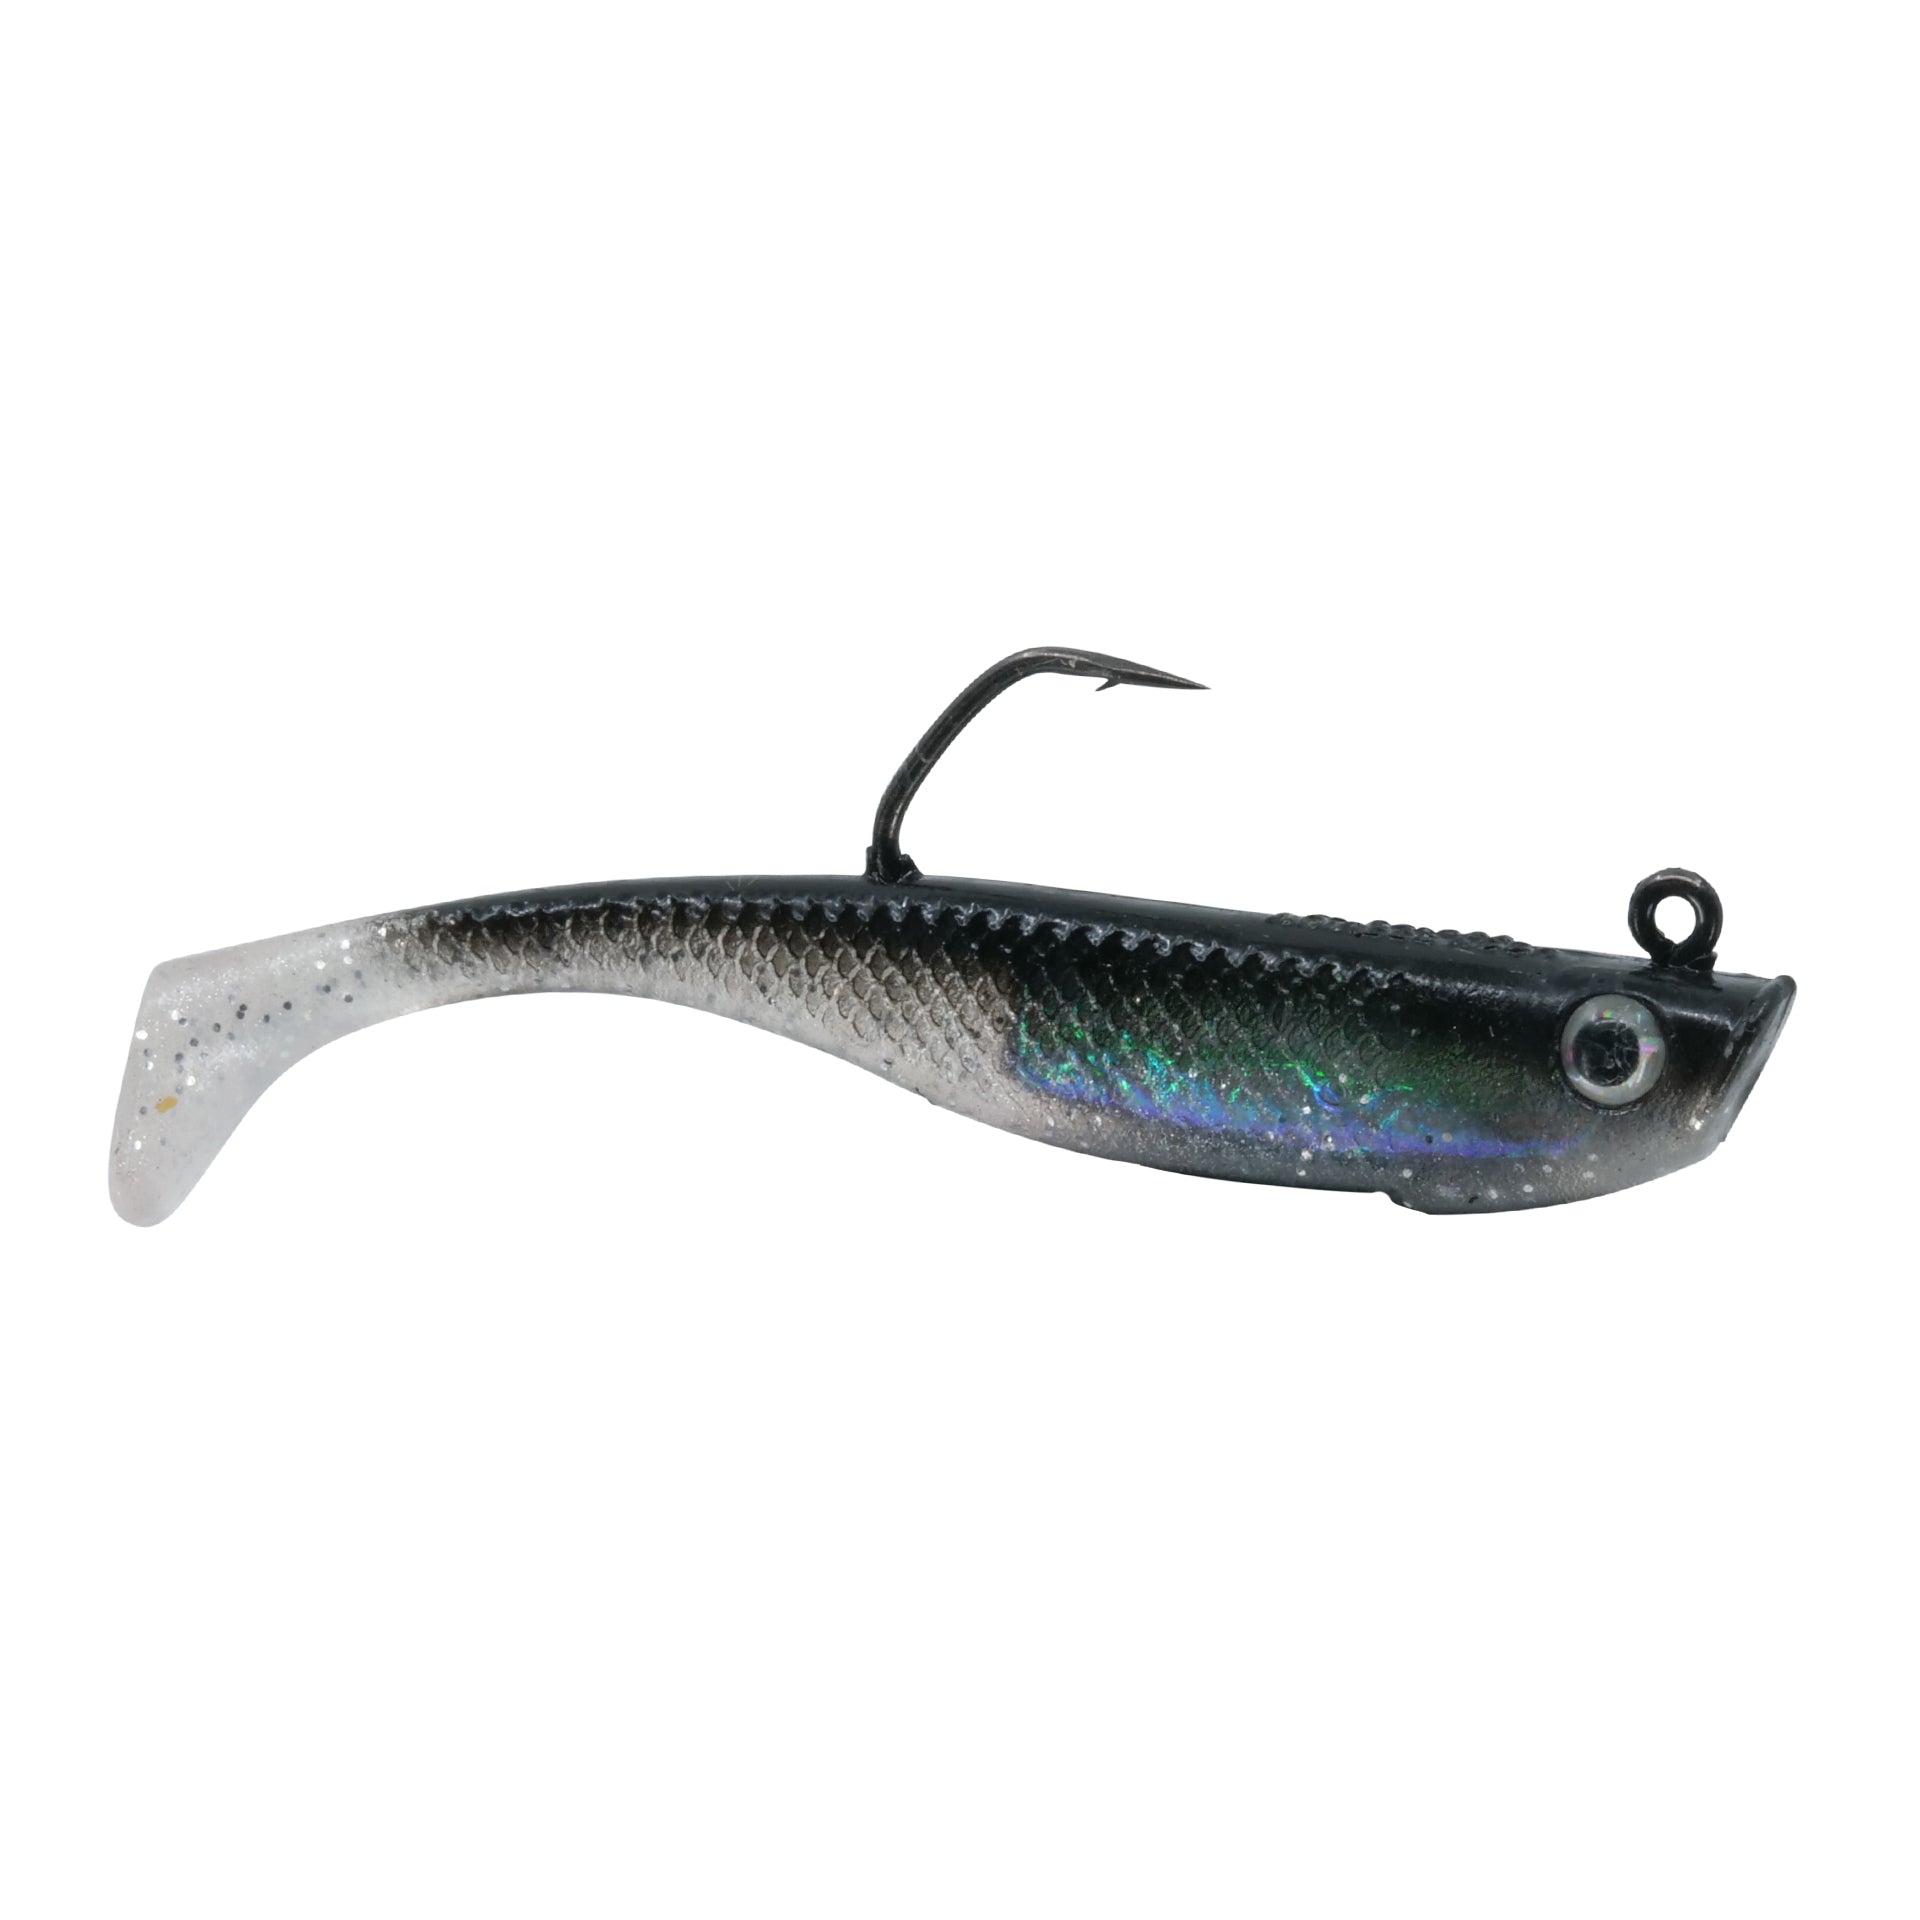 Predilures Bass Lure Crazy snake head 125mm 18g Walking Topwater